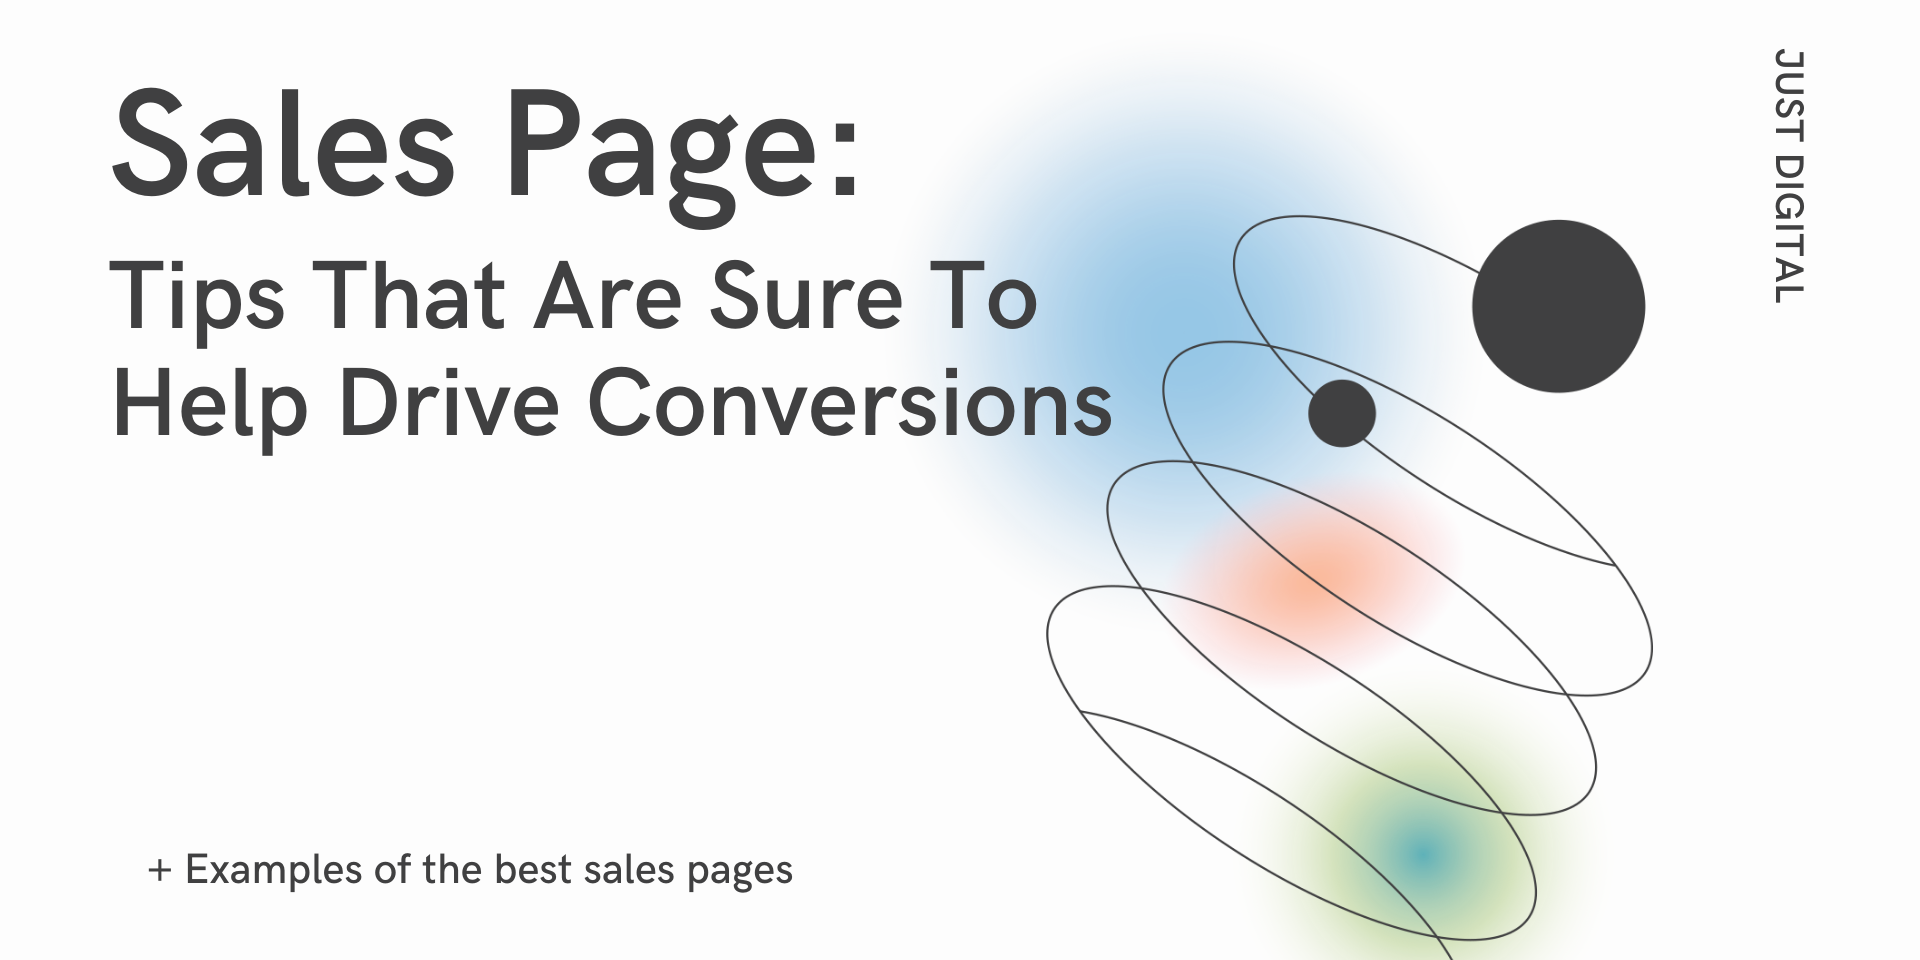 Sales Page Tips